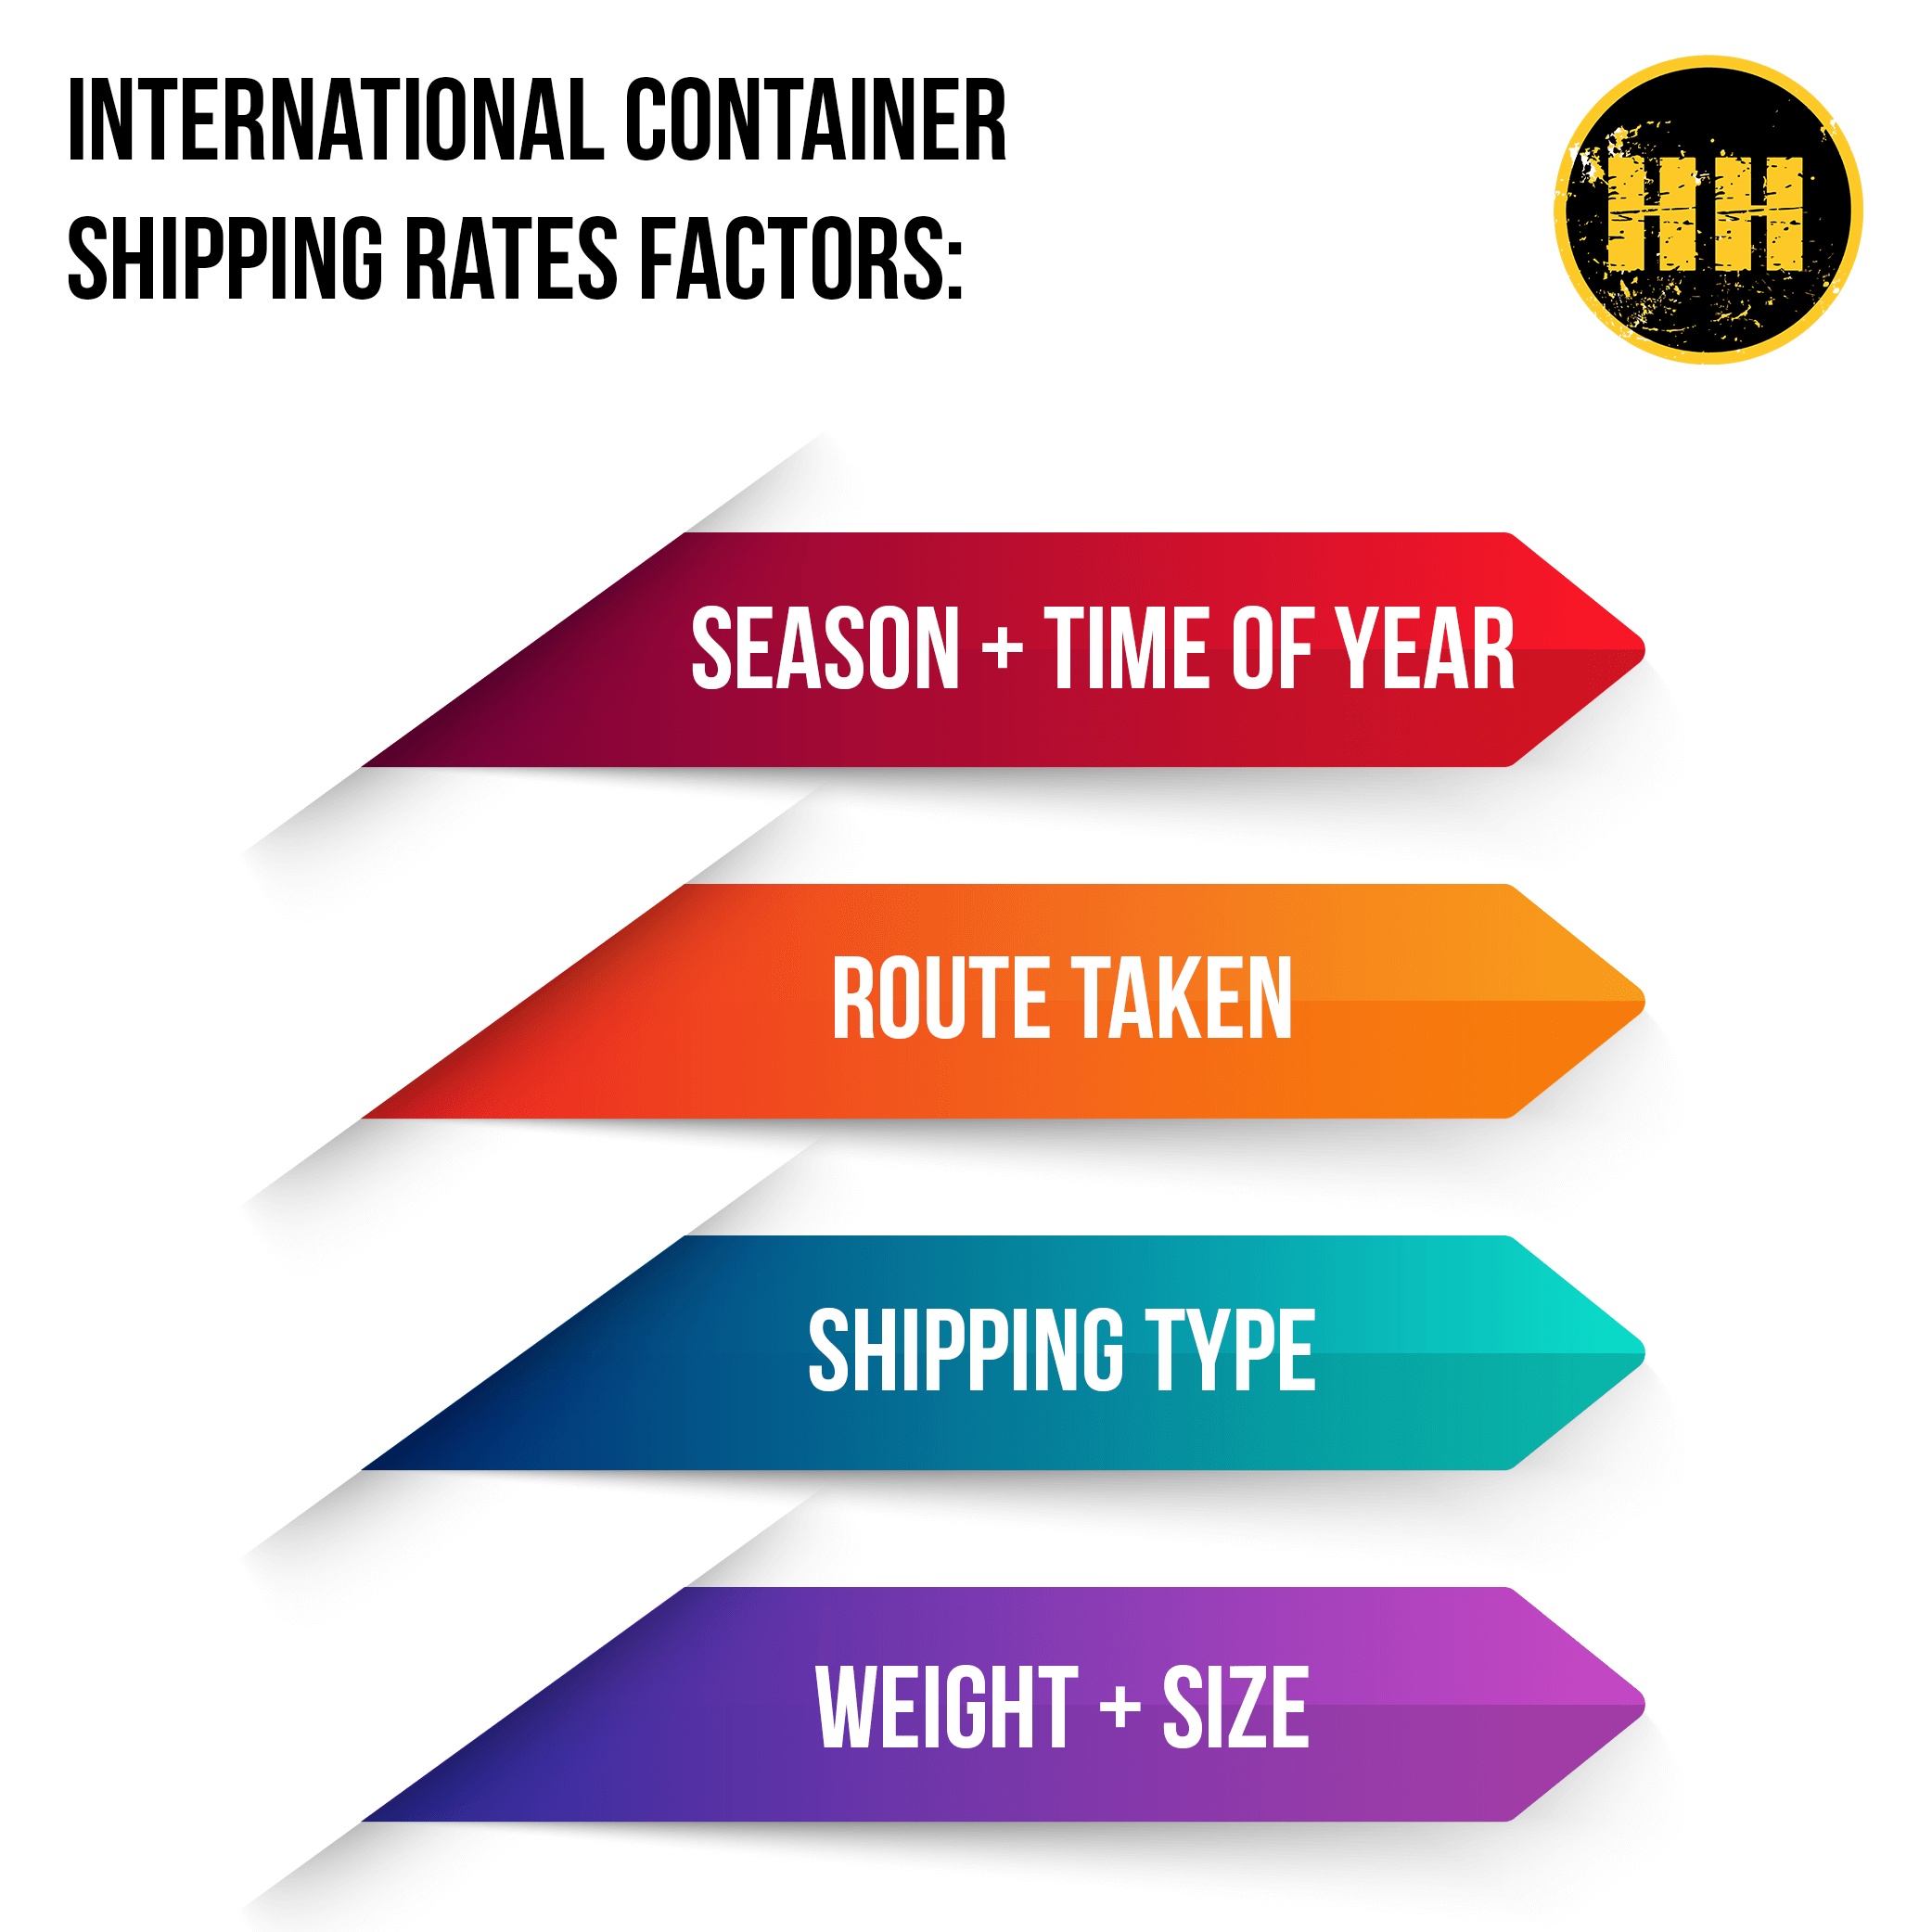 Container shipping rates factors infographic